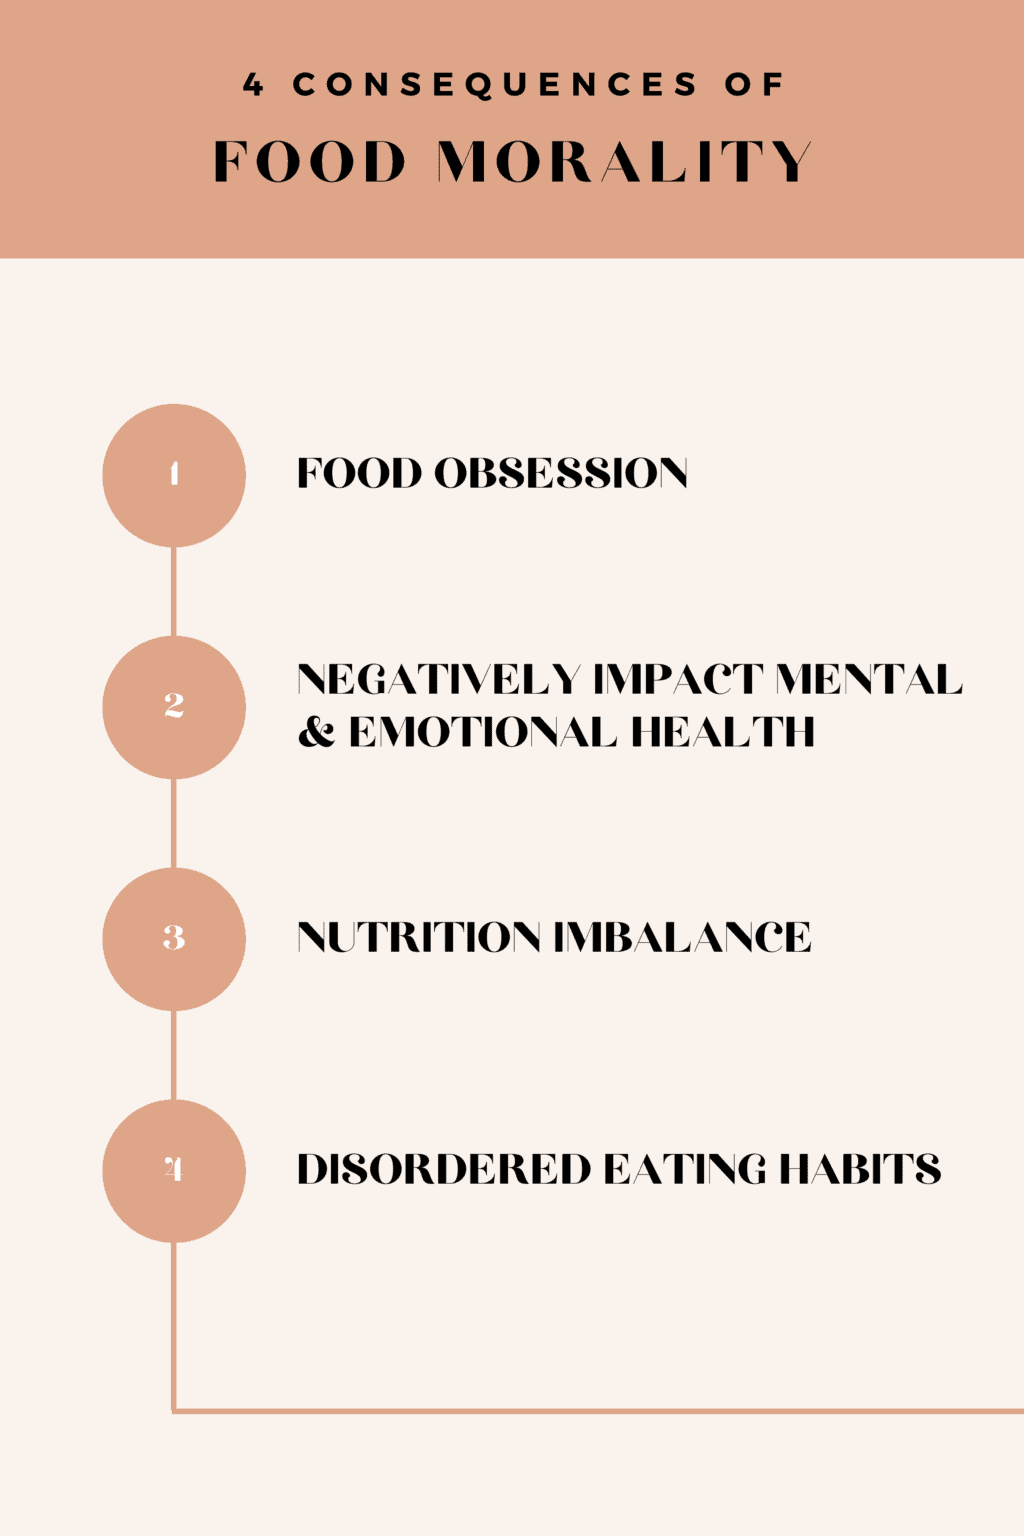 a numbered list that reads "The 4 Consequences of Food Morality. 1. Food Obsession 2. Negatively Impact Mental & Emotional Health 3. Nutrition Imbalance 4. Disordered Eating Habits